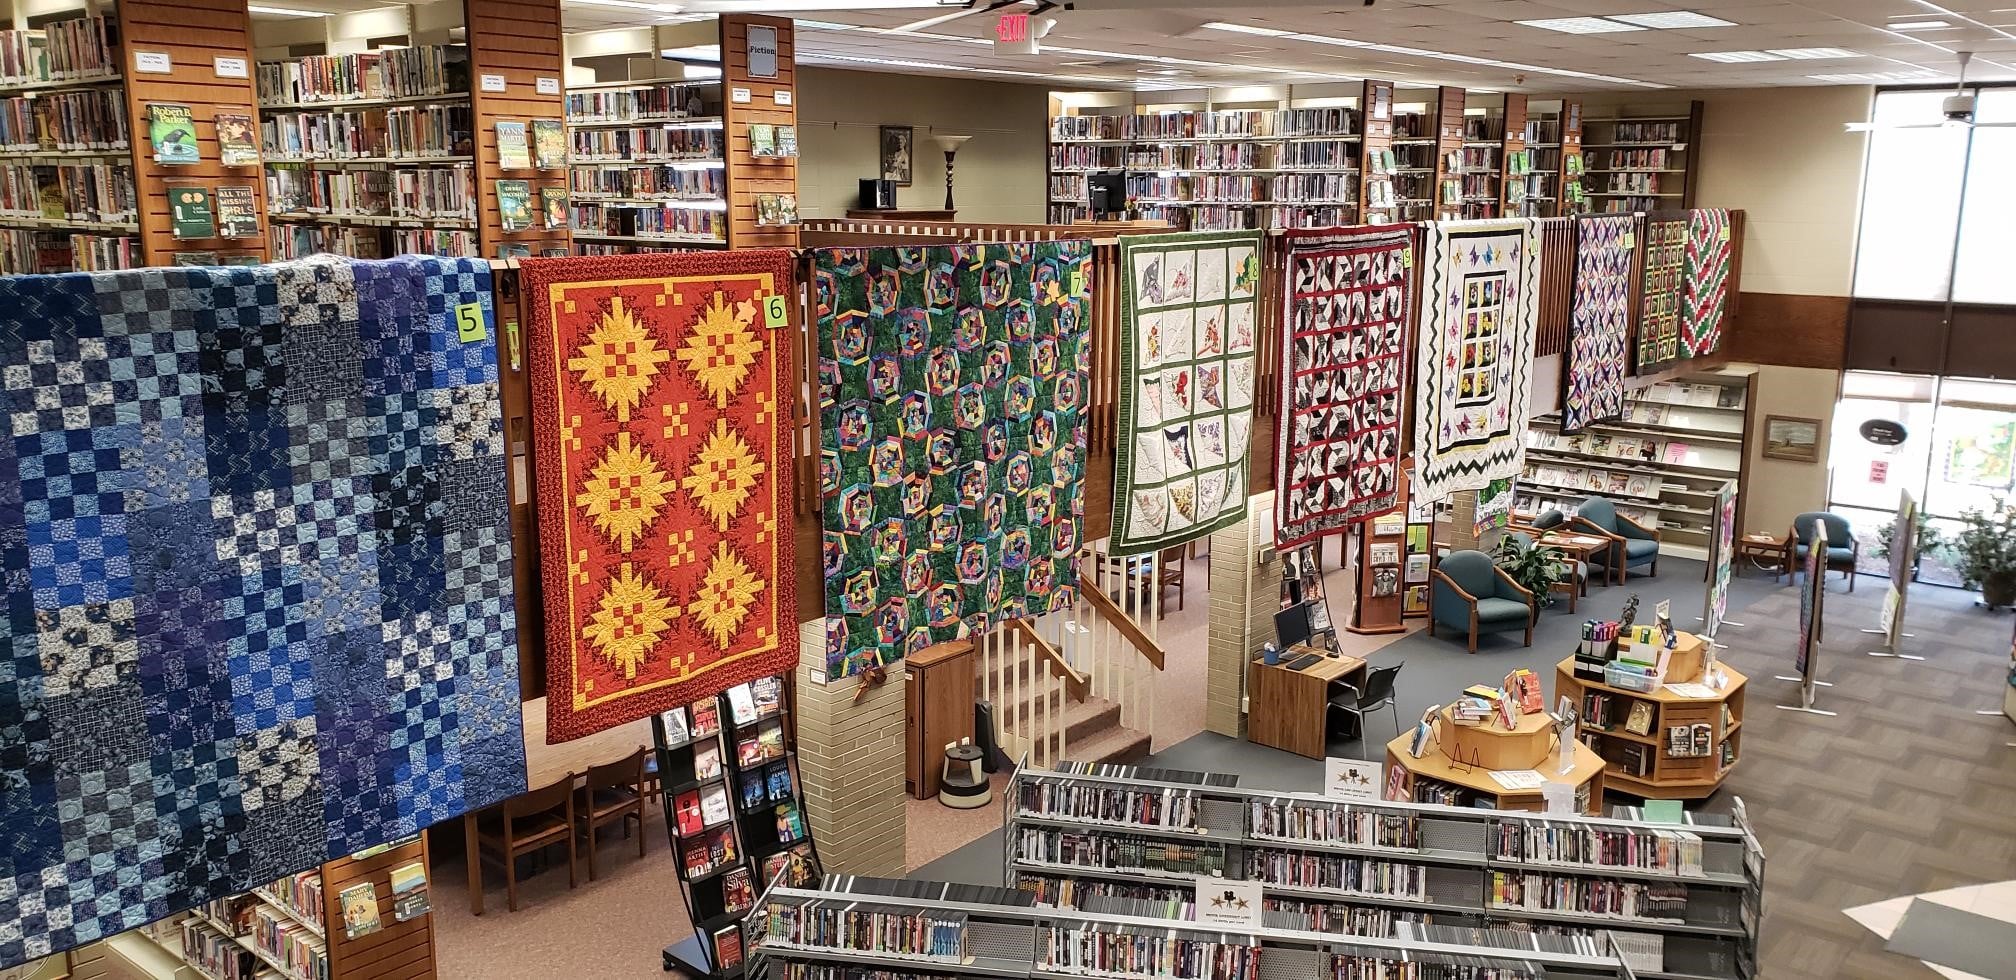 Quilts hanging from the mezzanine banister at the Berlin Public Library.